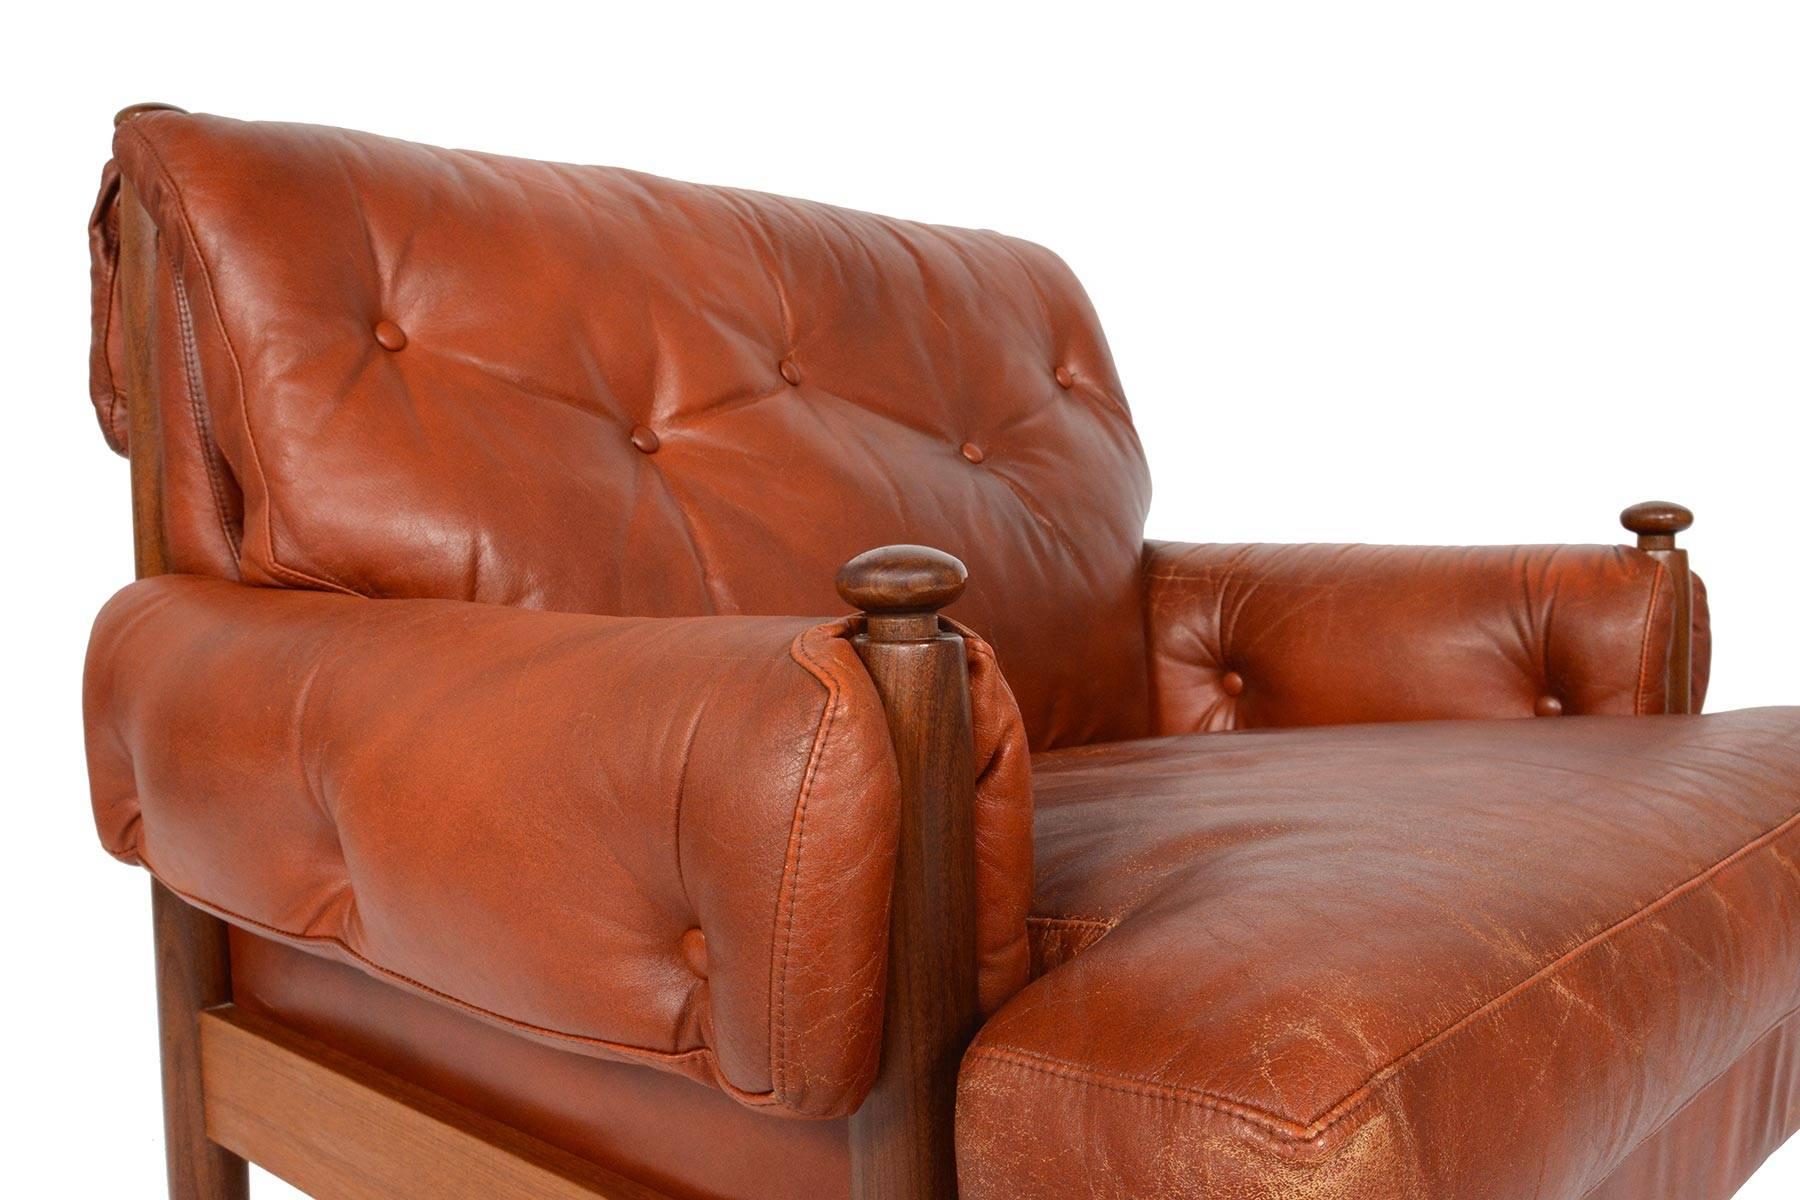 This Swedish modern leather club chair is as cozy and comfortable as they come! With a Silhouette reminiscent of Sergio Rodrigues' Sheriff chair, this solid walnut frame holds original rust red leather cushions. The cushions fold over the sides of